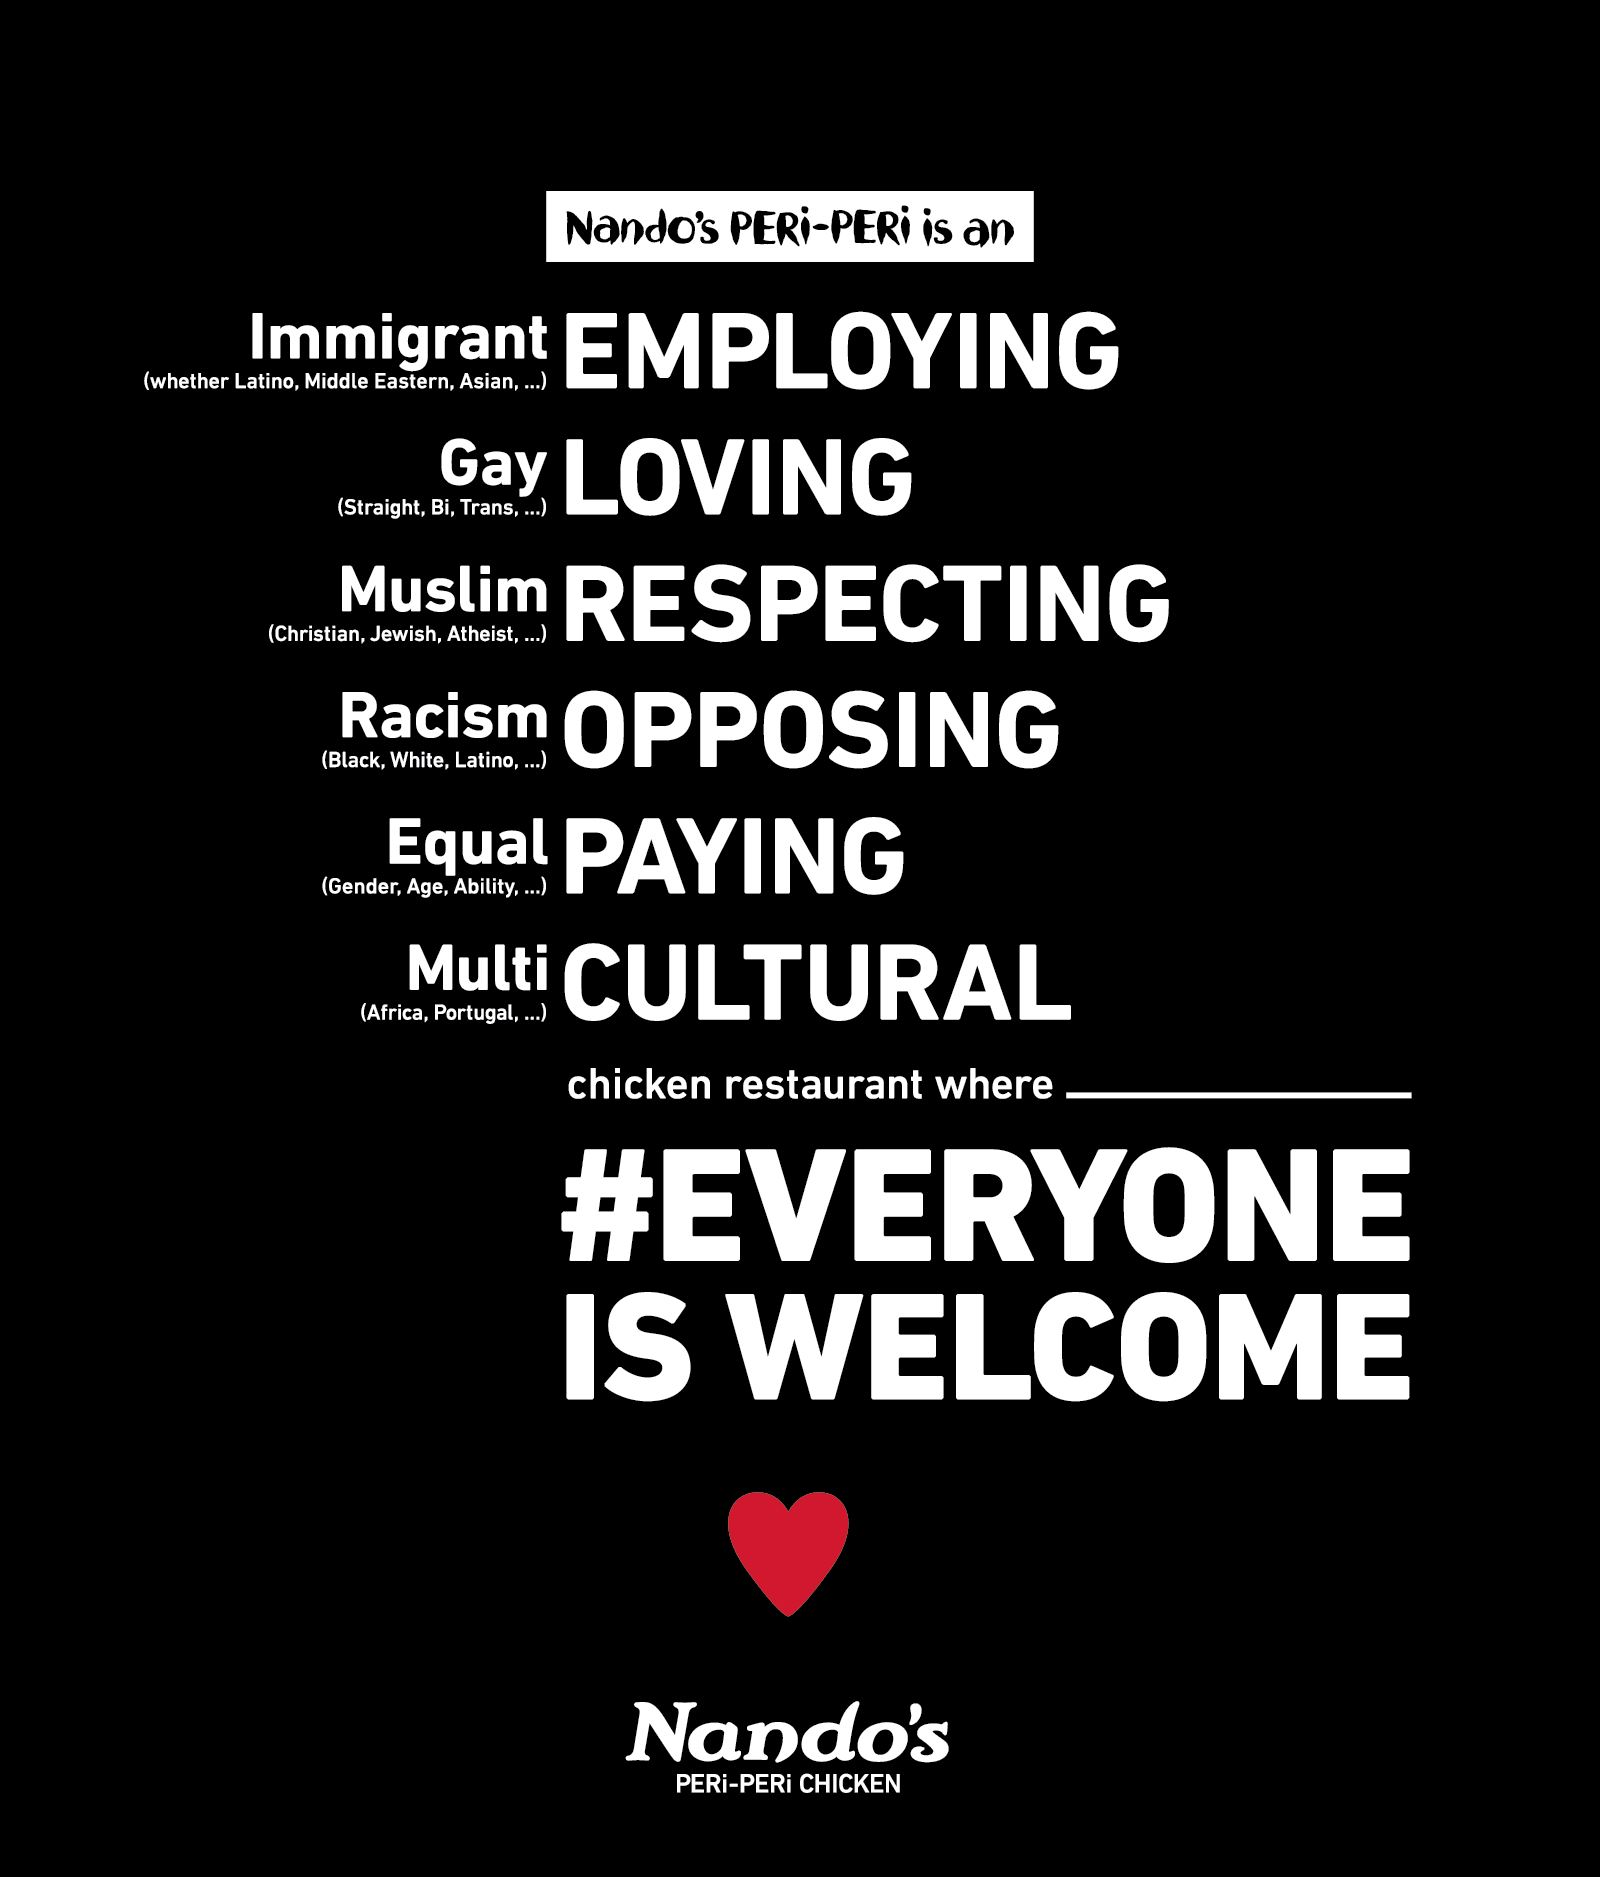 Nando’s is launching a campaign at its D.C. restaurants declaring “#Everyone is Welcome,” to express the international restaurant chain’s belief in the values of inclusion, diversity and mutual respect. (Courtesy Nando's Peri-Peri)